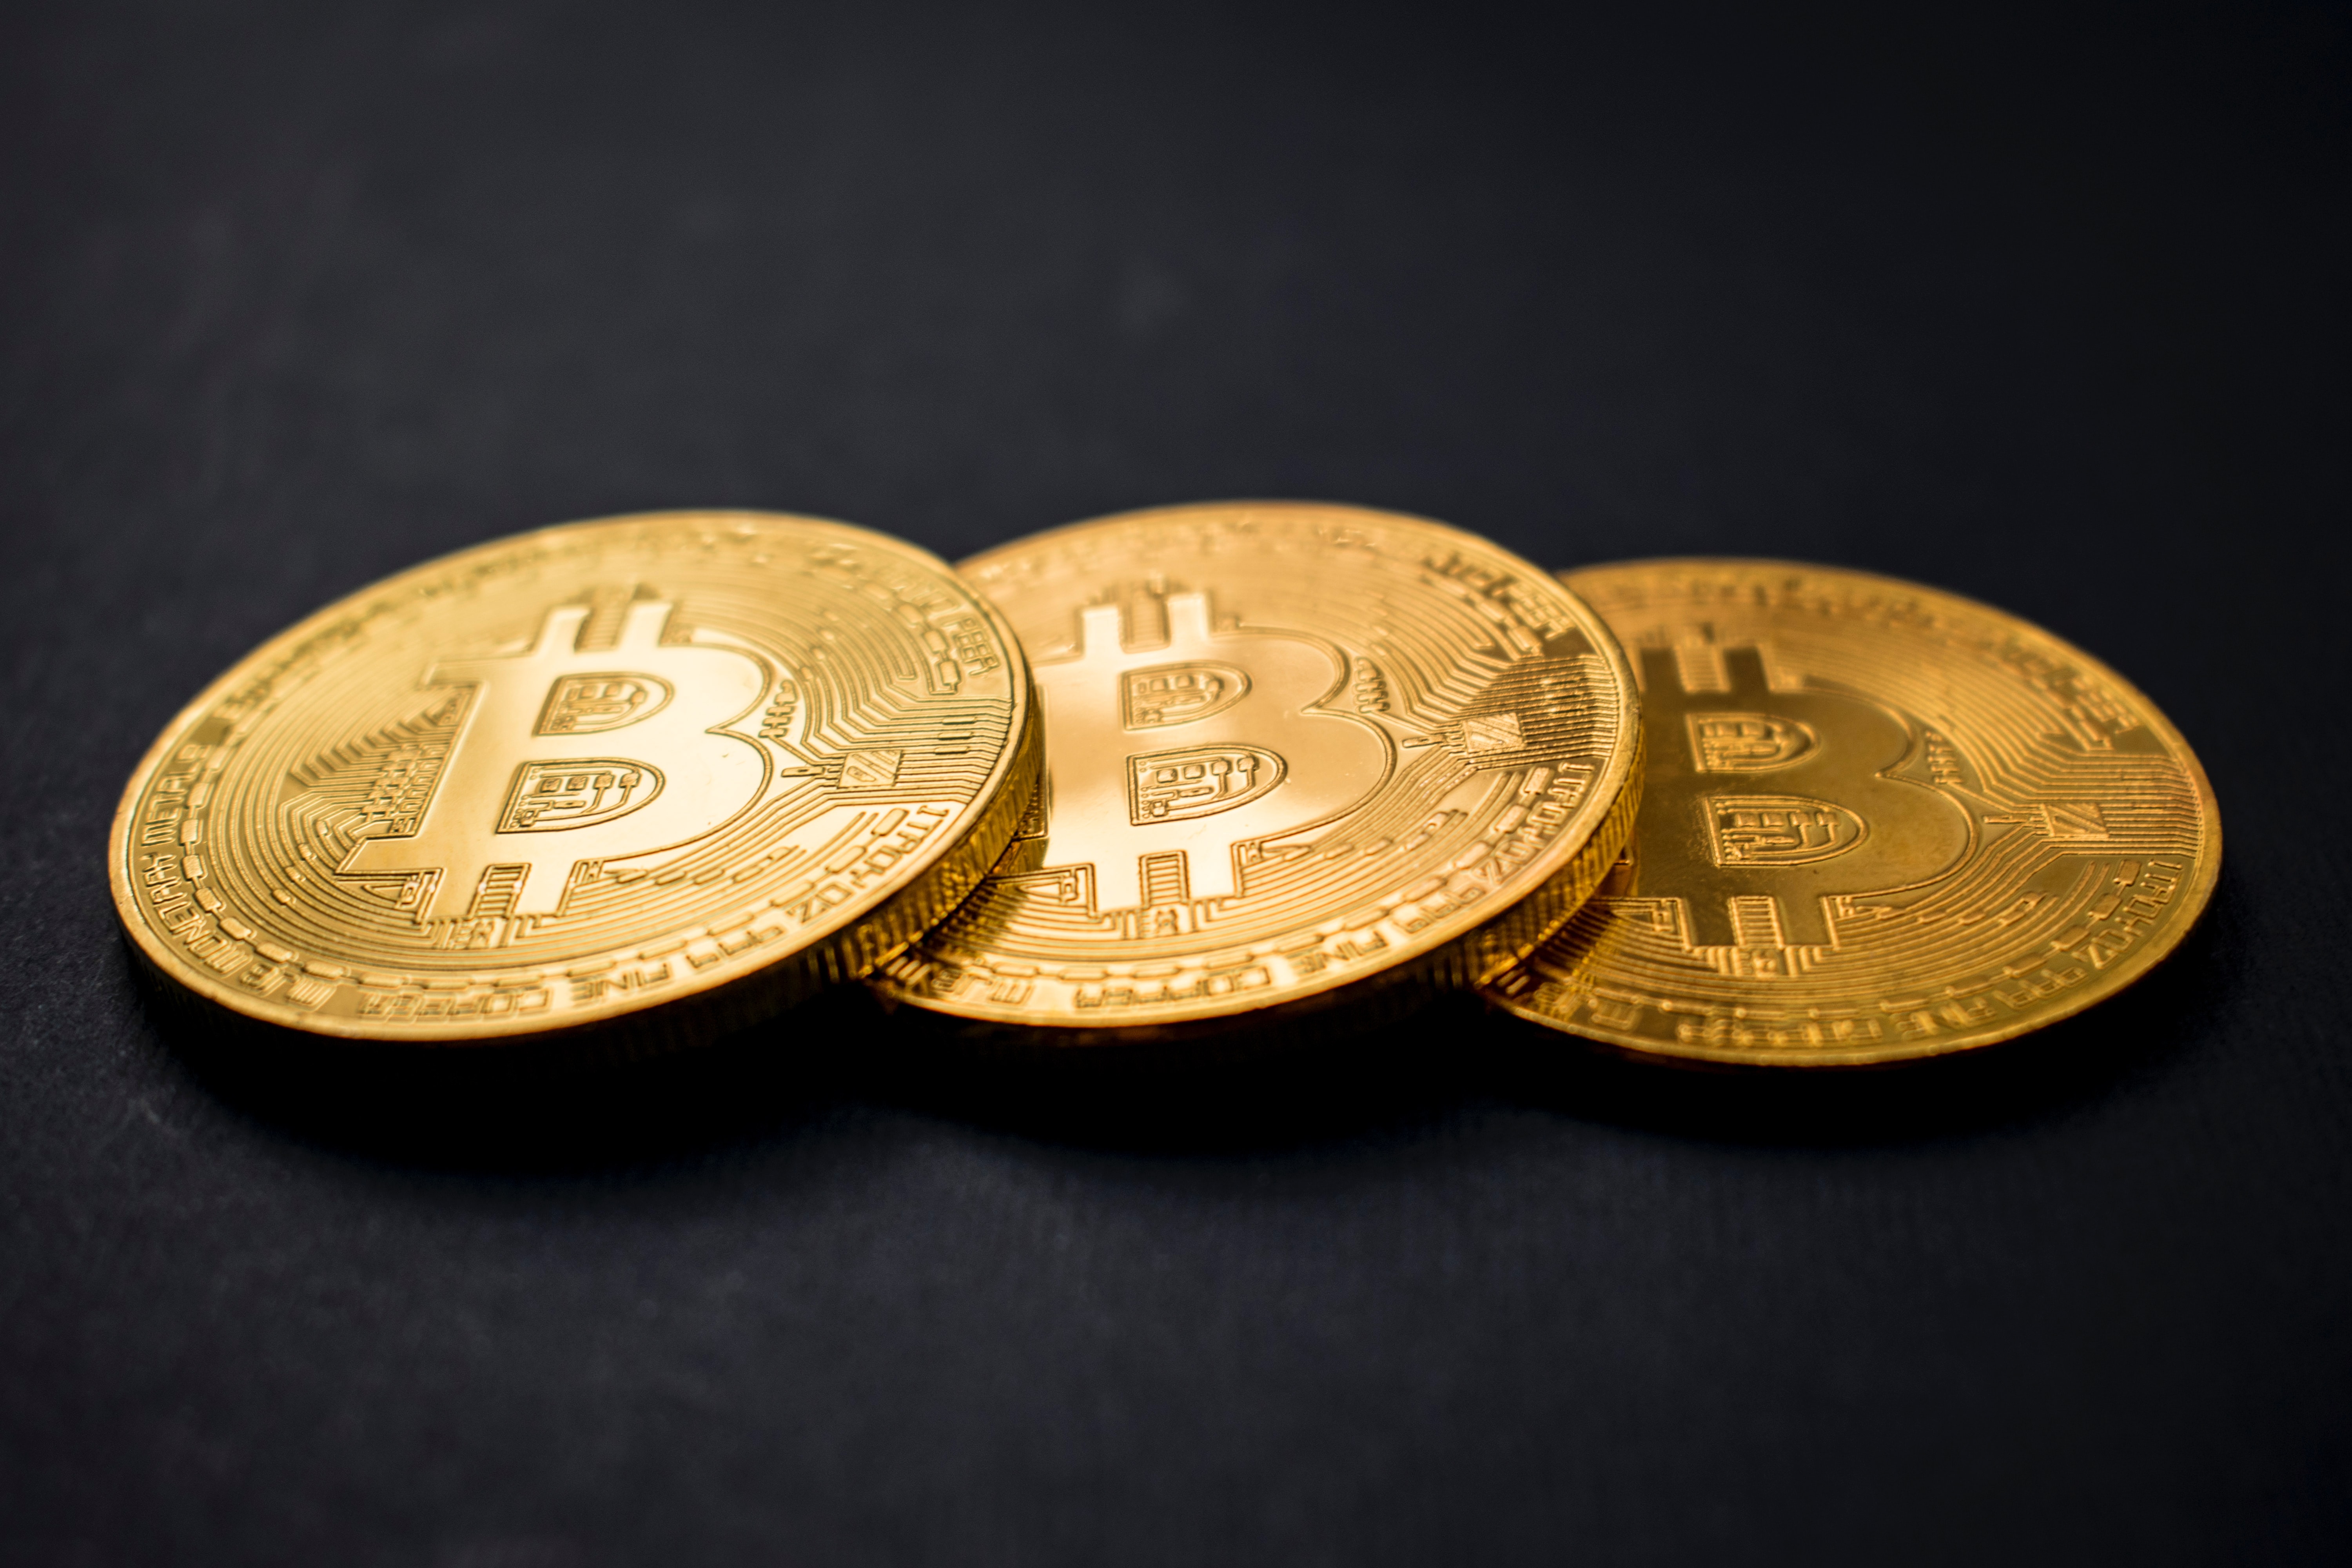 Exploring the link between Bitcoin and Indices - What is it teaching investors?